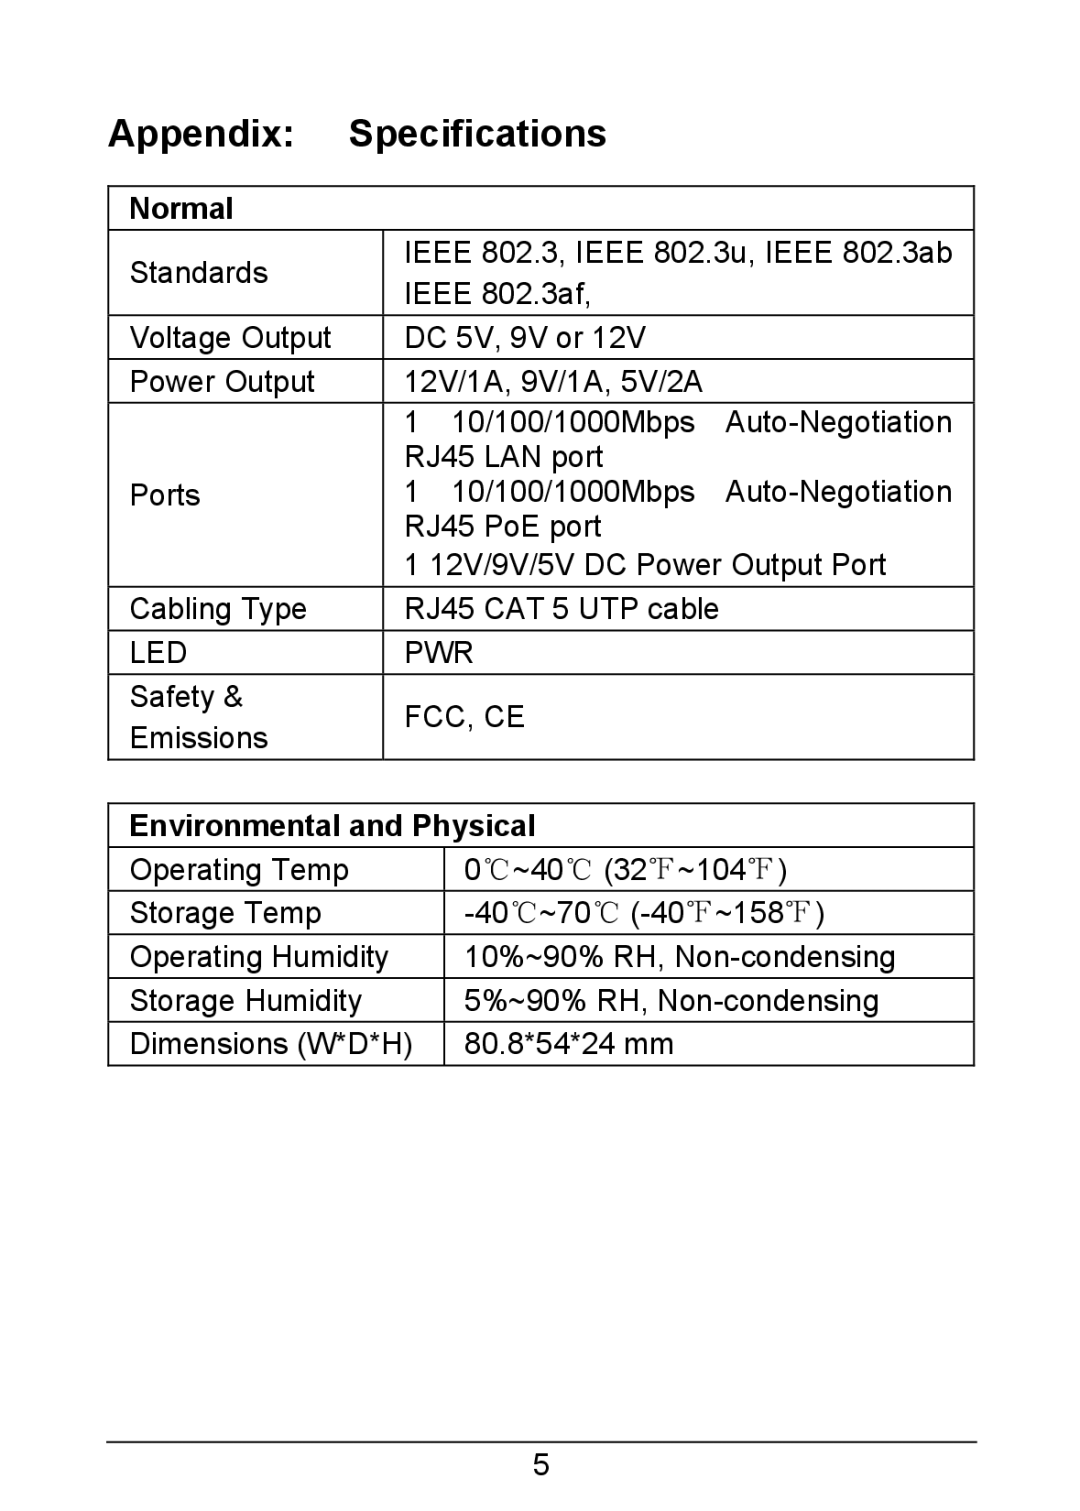 TP-Link TL-POE10R manual Appendix Specifications, Normal, Environmental and Physical 